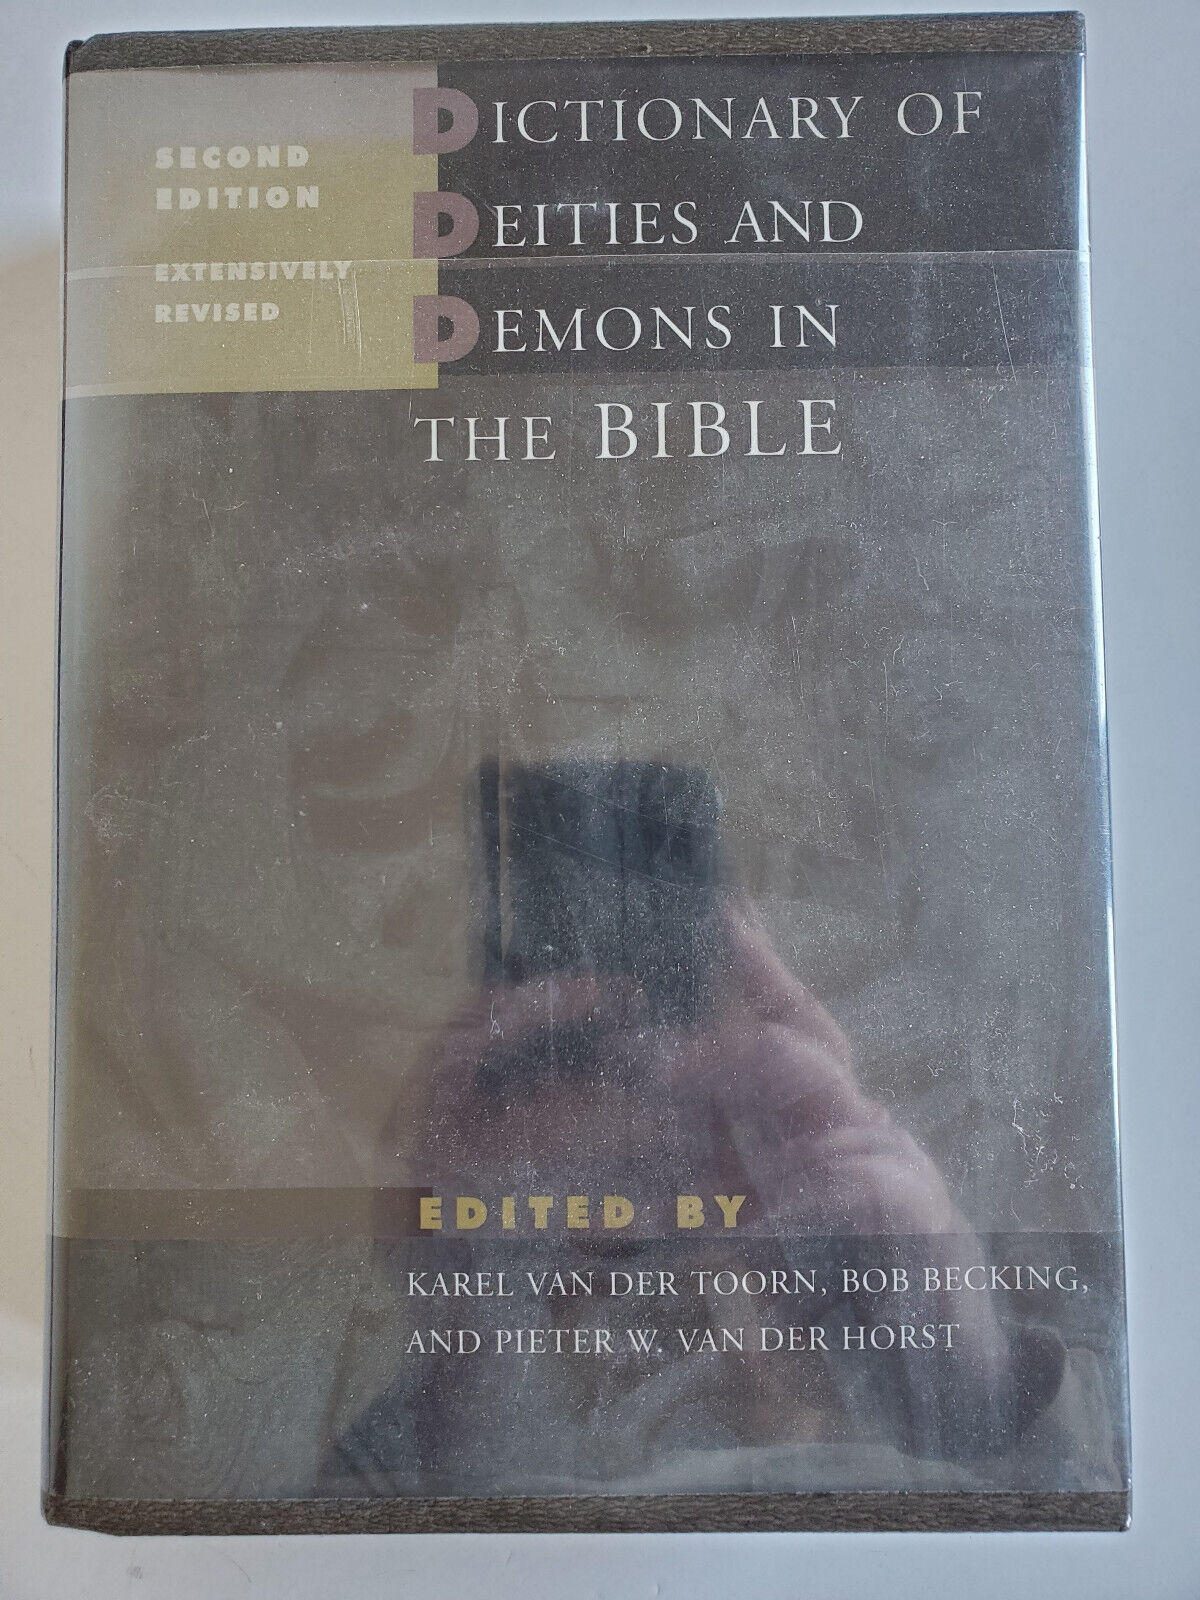 Dictionary of Deities & Demons in the Bible, Second Edition, Extensively Revised